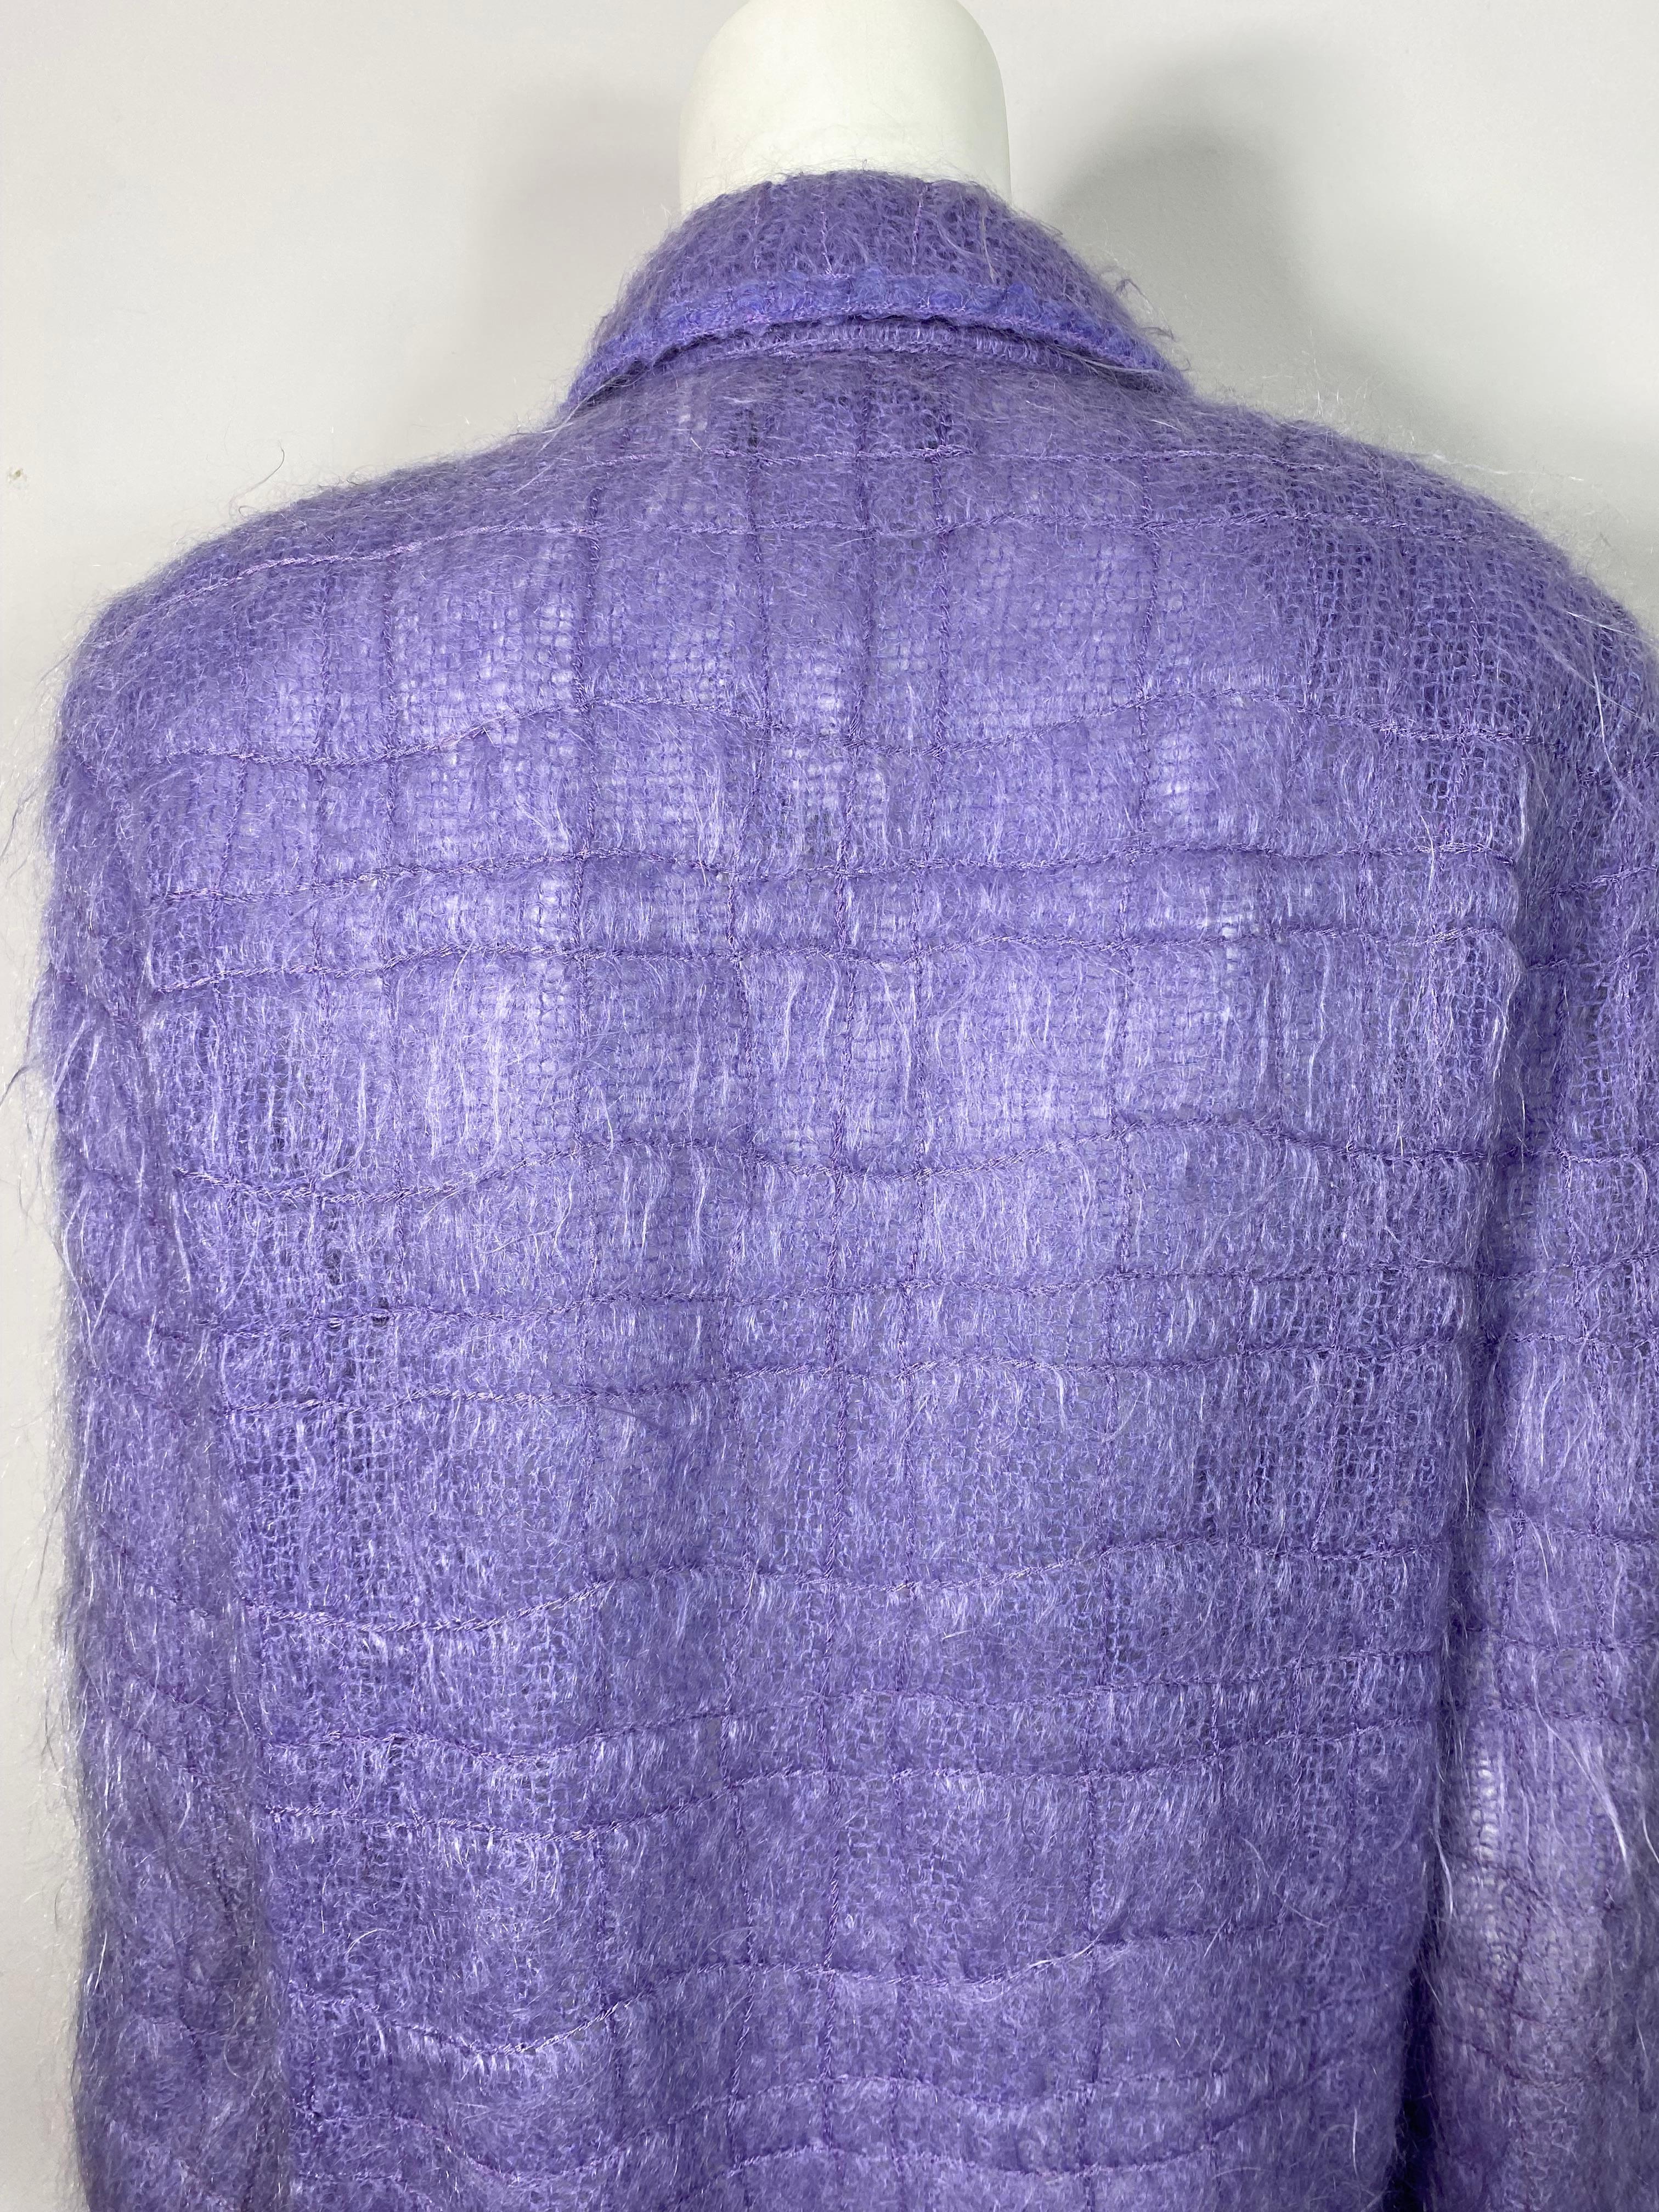 Chanel Runway Fall 1998 Lavender Mohair Jacket - Size 36 For Sale 6